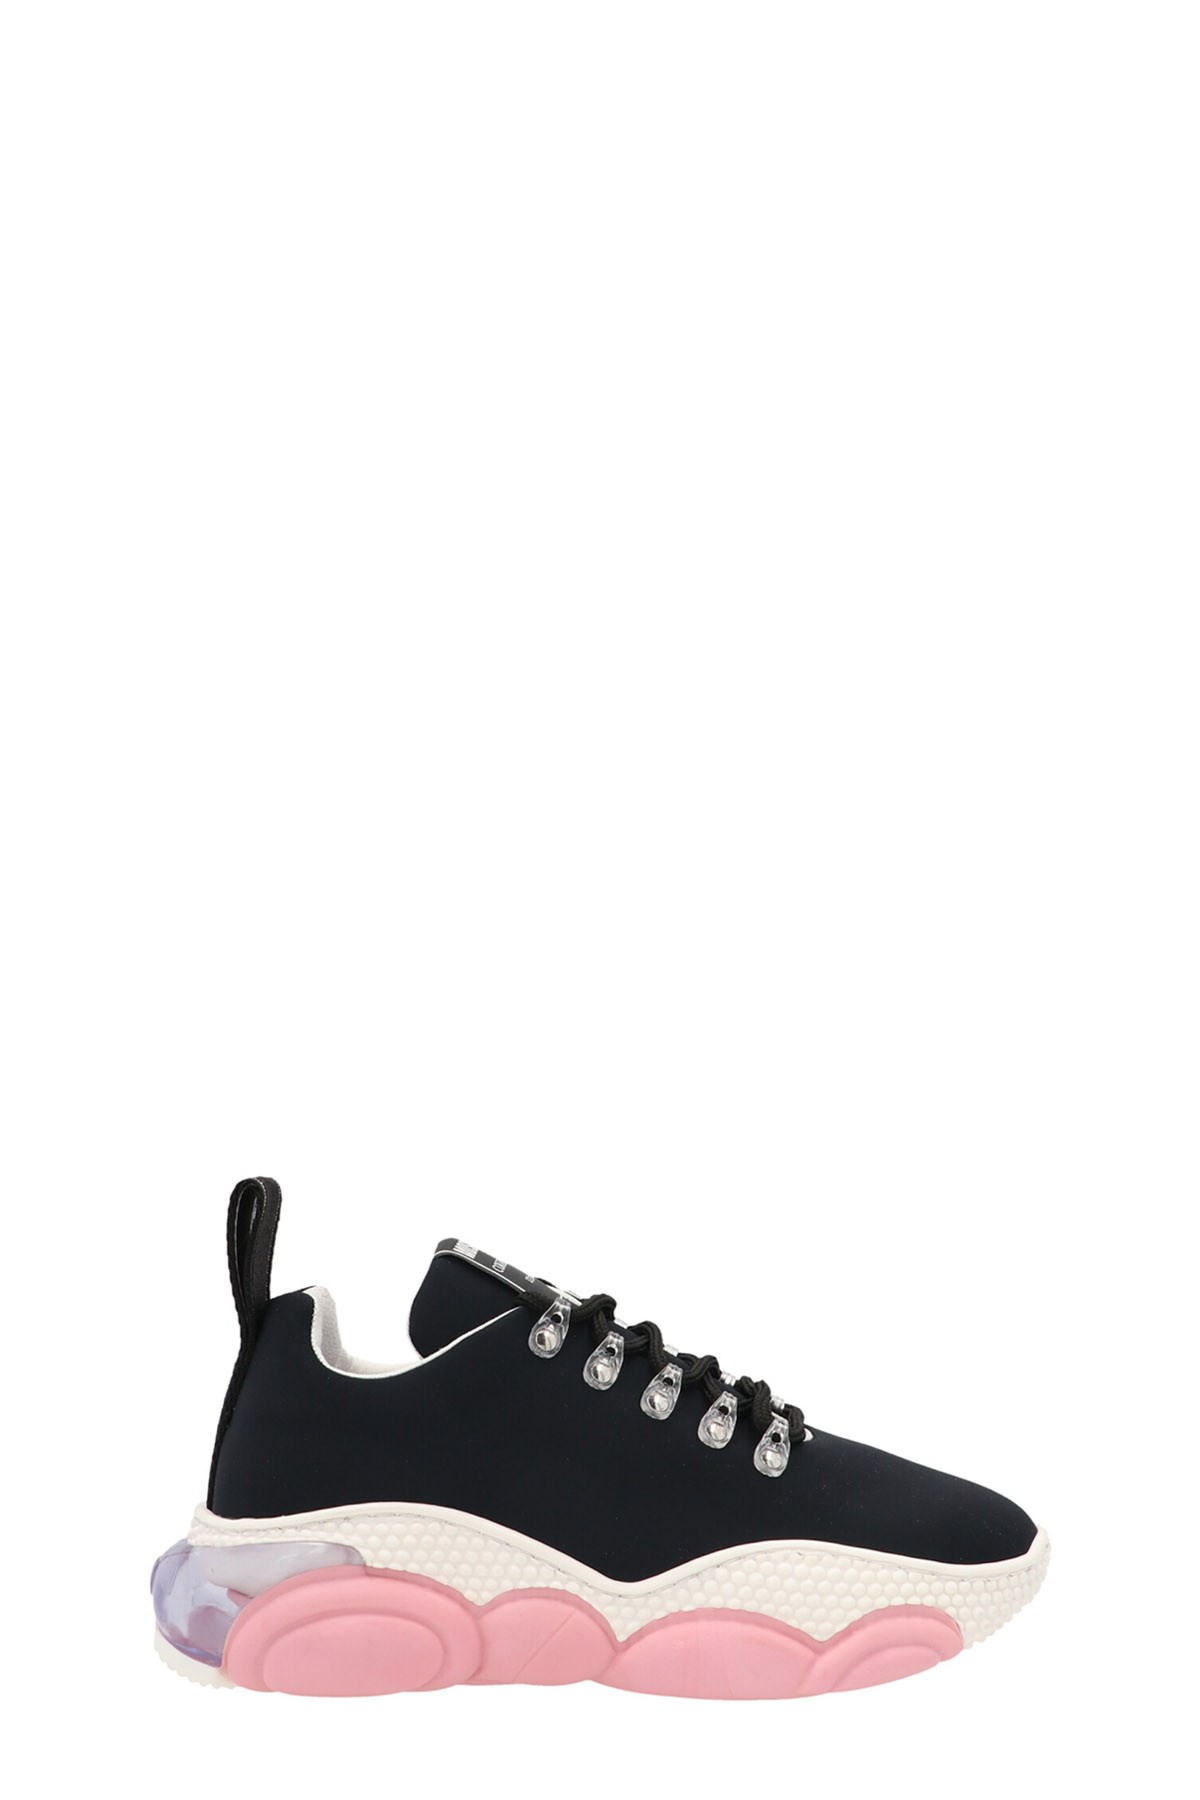 MOSCHINO Sneakers Mit Abzieherdetail